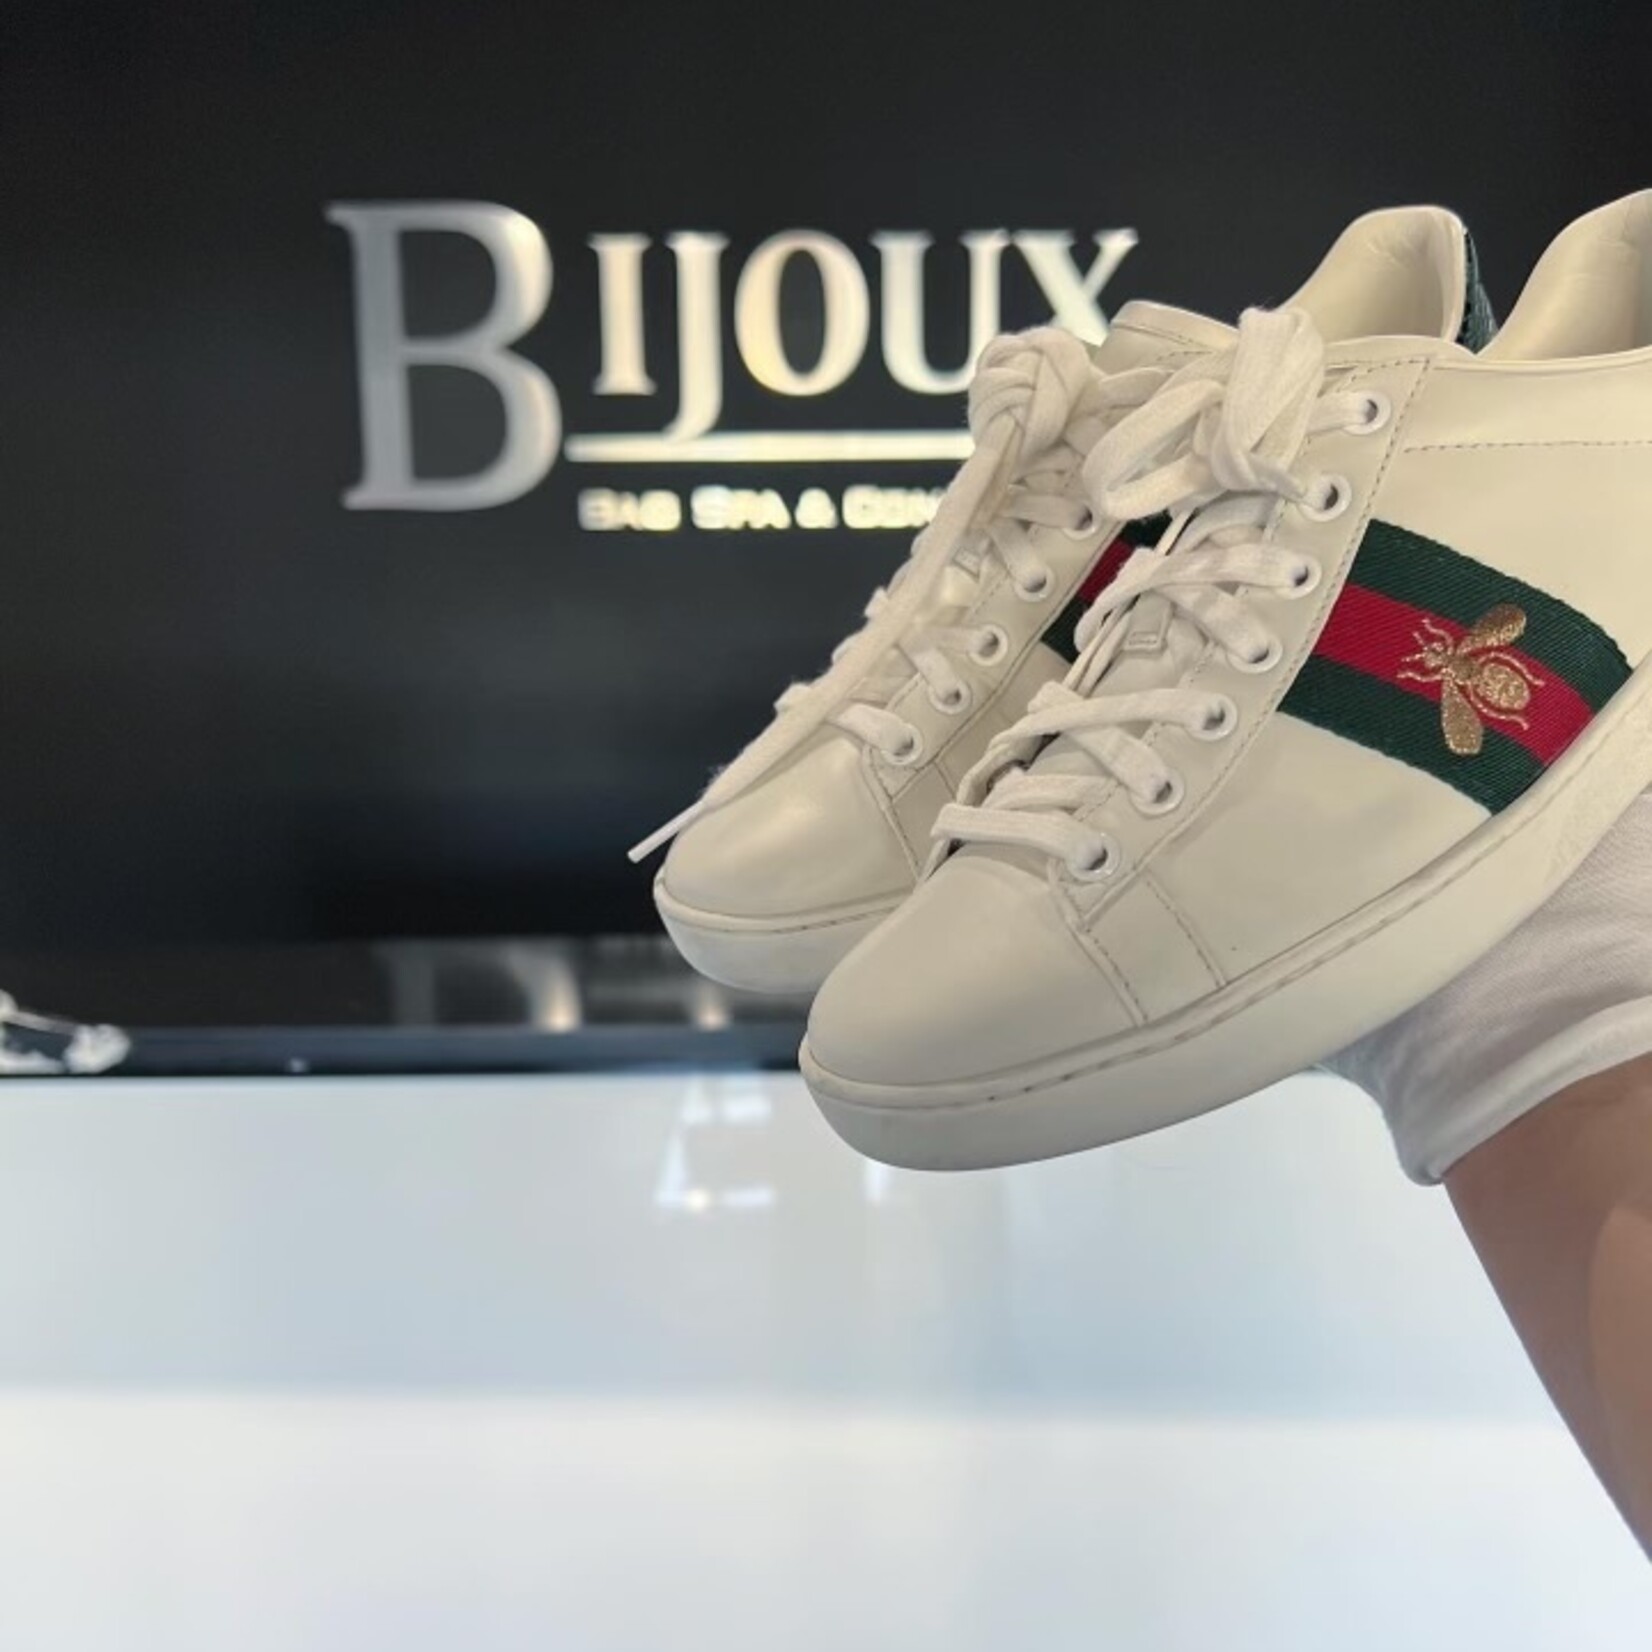 Gucci Men's Gucci Ace Sneakers | Bloomingdale's